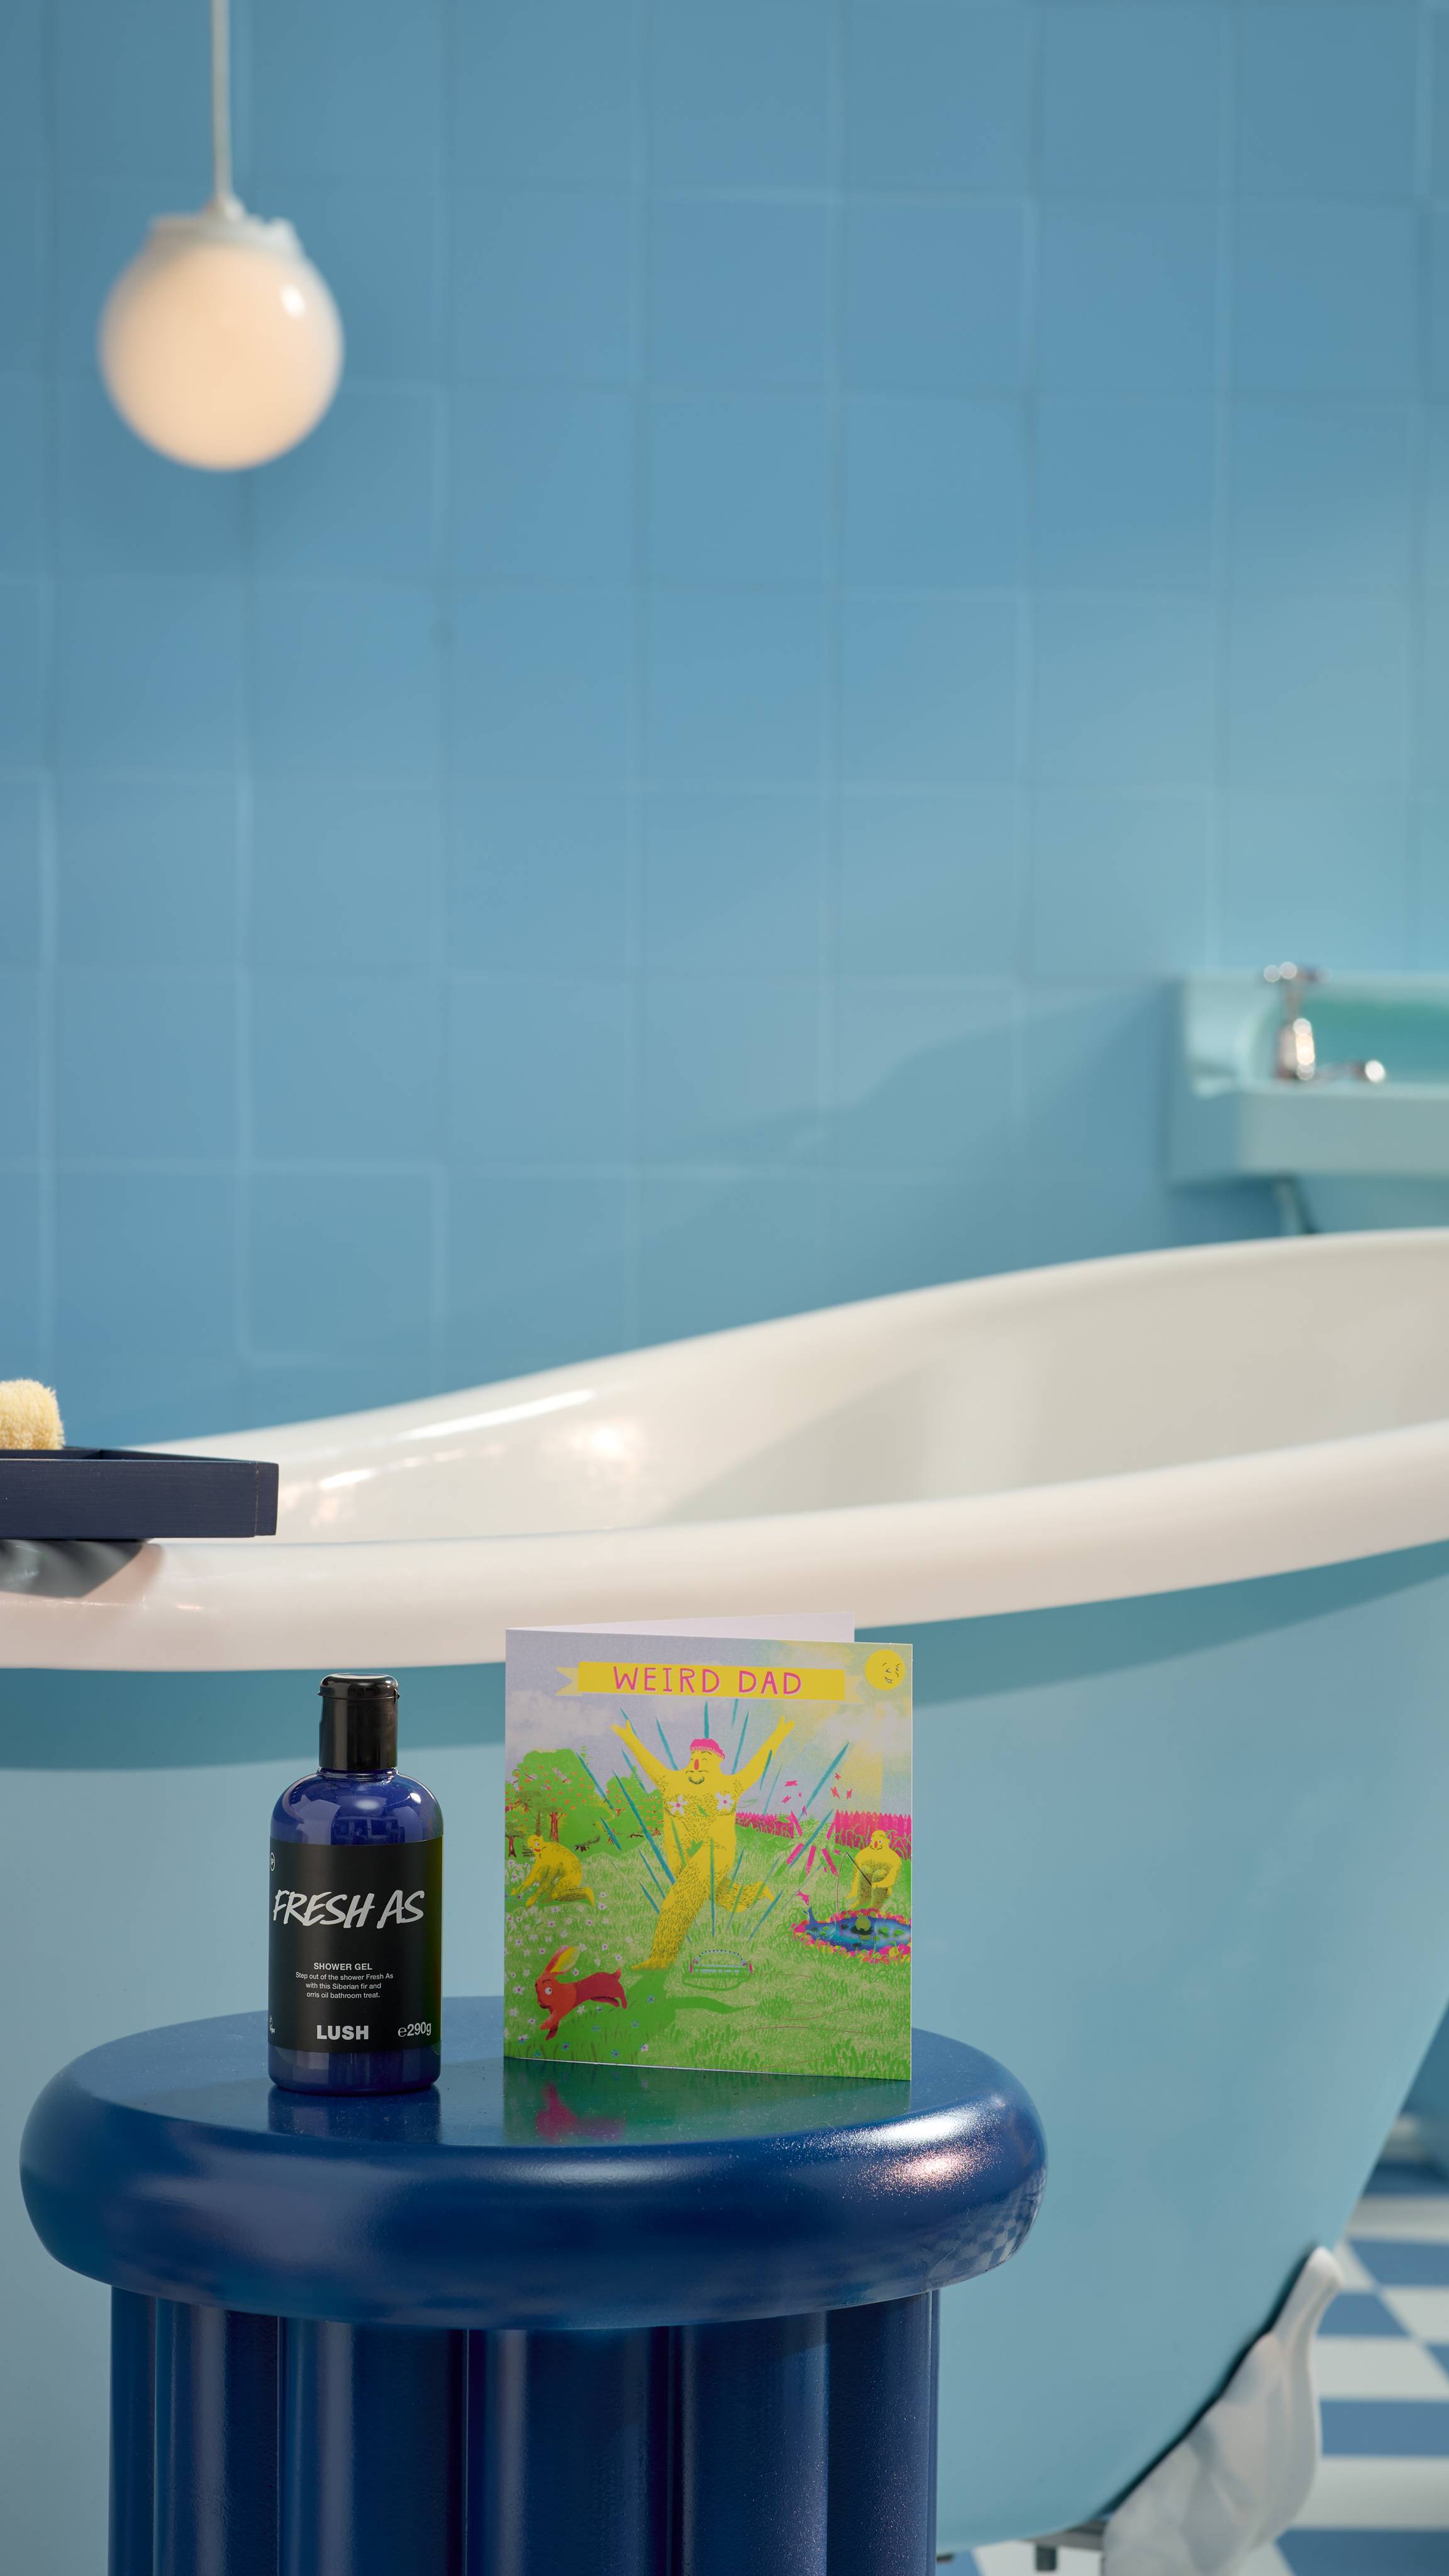 The image shows a blue, tiled bathroom with a roll-top bathtub. There is a bright blue stool in front of the bath with the Fresh As shower gel and Weird Dad card on top. 